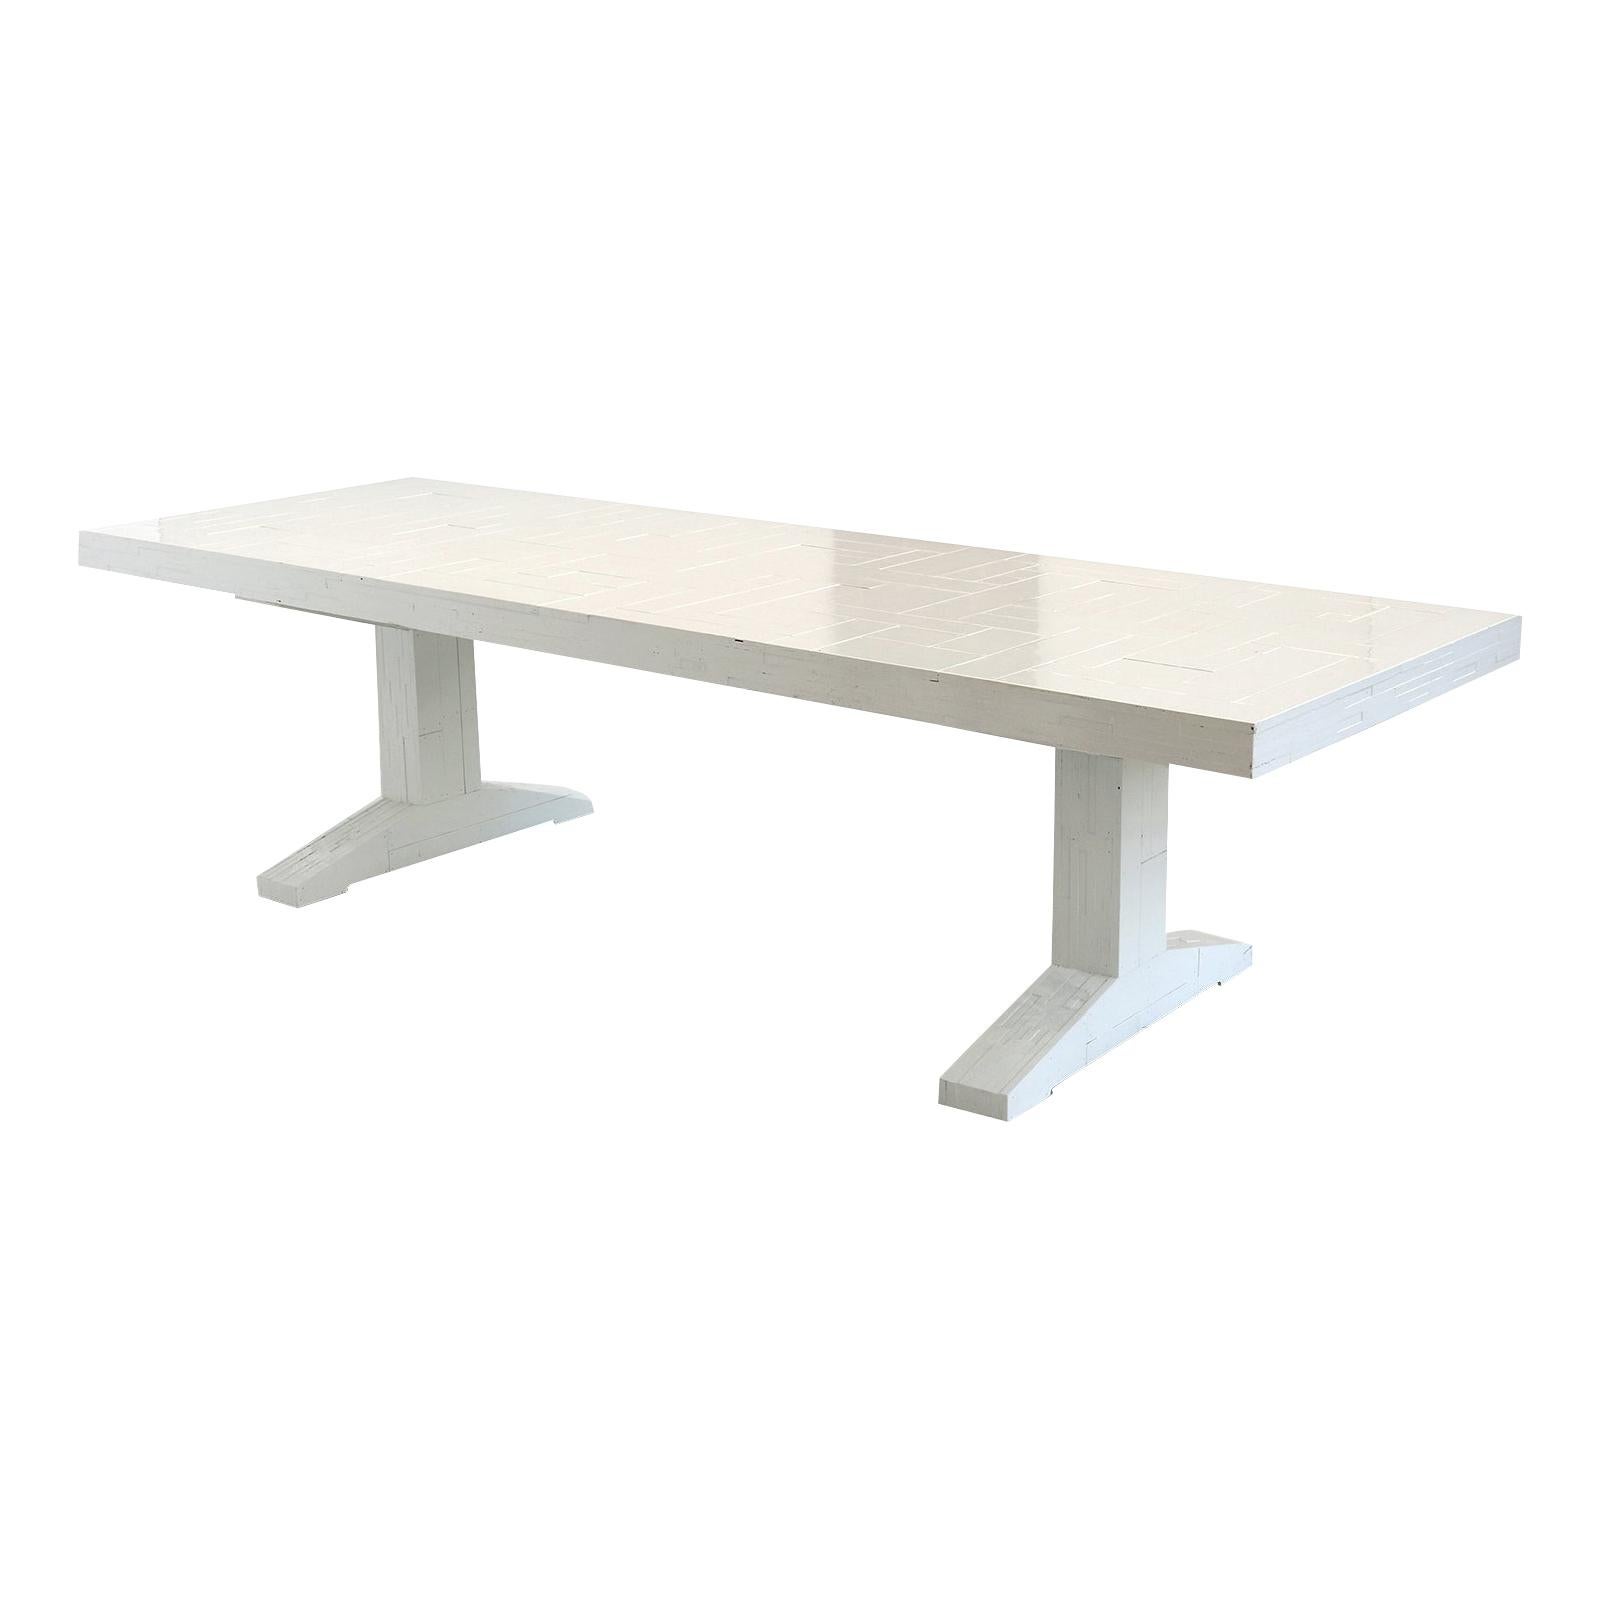 Waste Table in High Gloss White by Piet Hein Eek